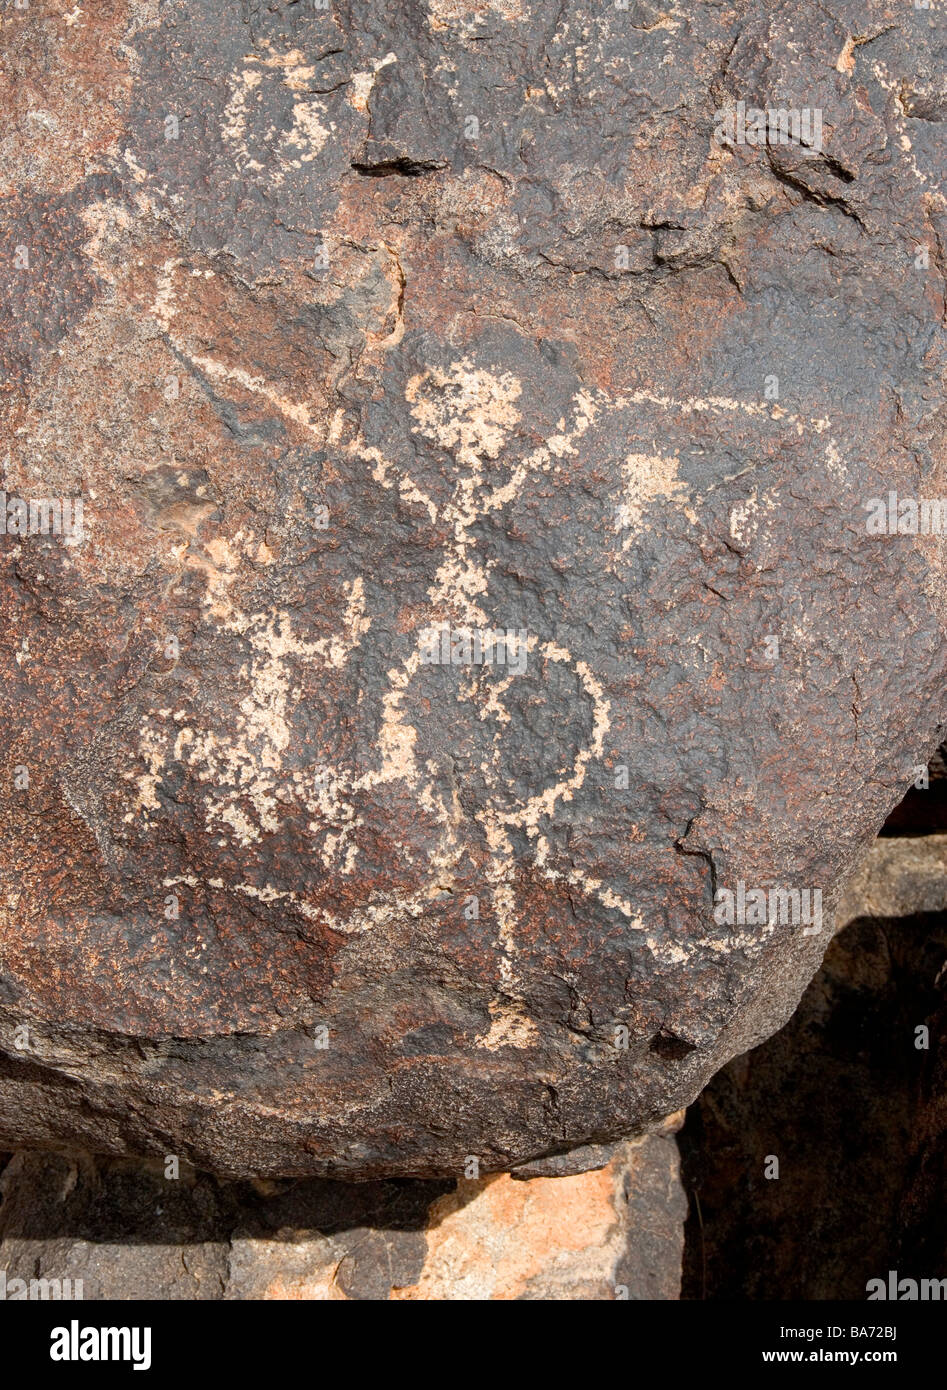 An ancient Hohokum Indian Petroglyph of a pregnant mother and newborn baby This art is located at Picacho Peak Arizona. Stock Photo